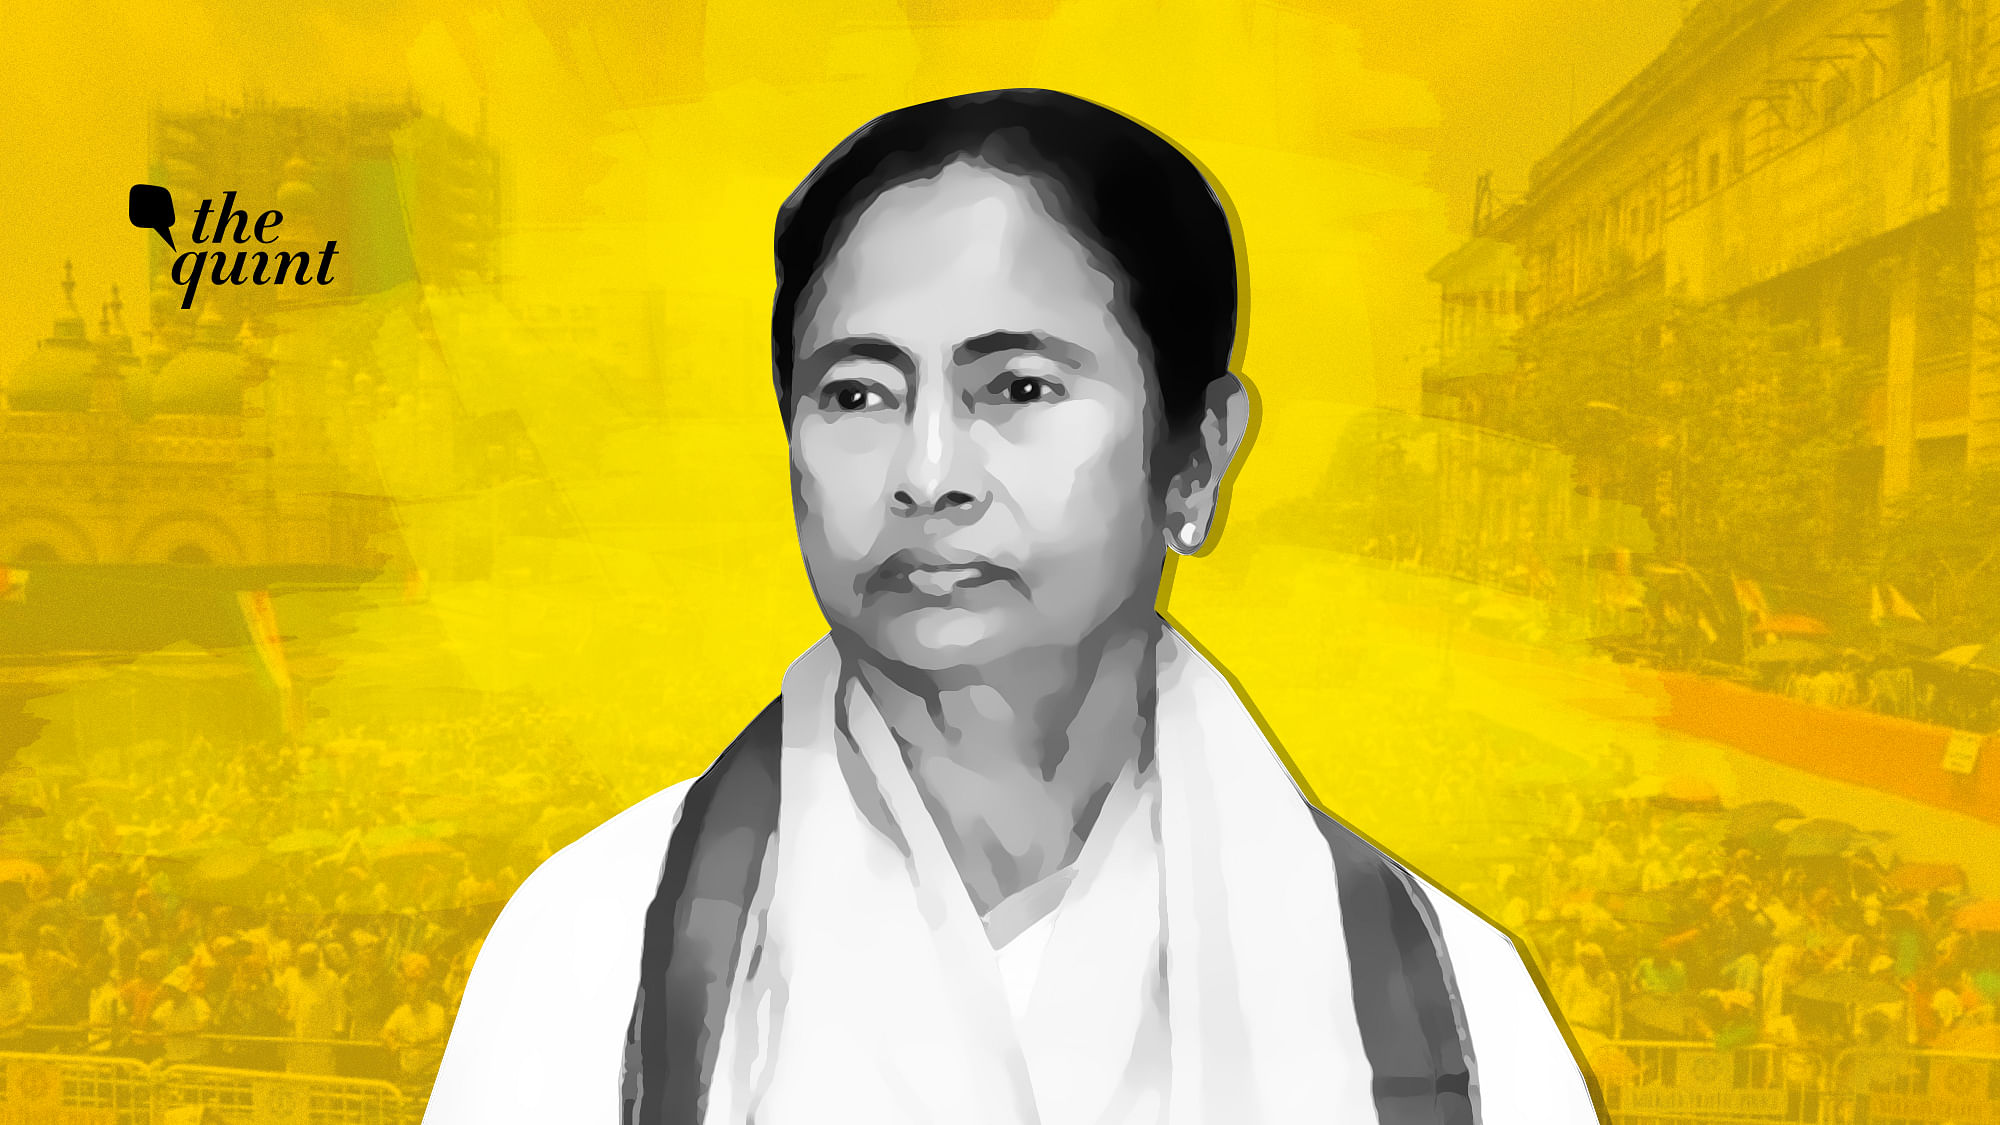 Image of West Bengal CM Mamata Banerjee against backdrop of 21 July 2019 rally in Bengal, used for representational purposes.